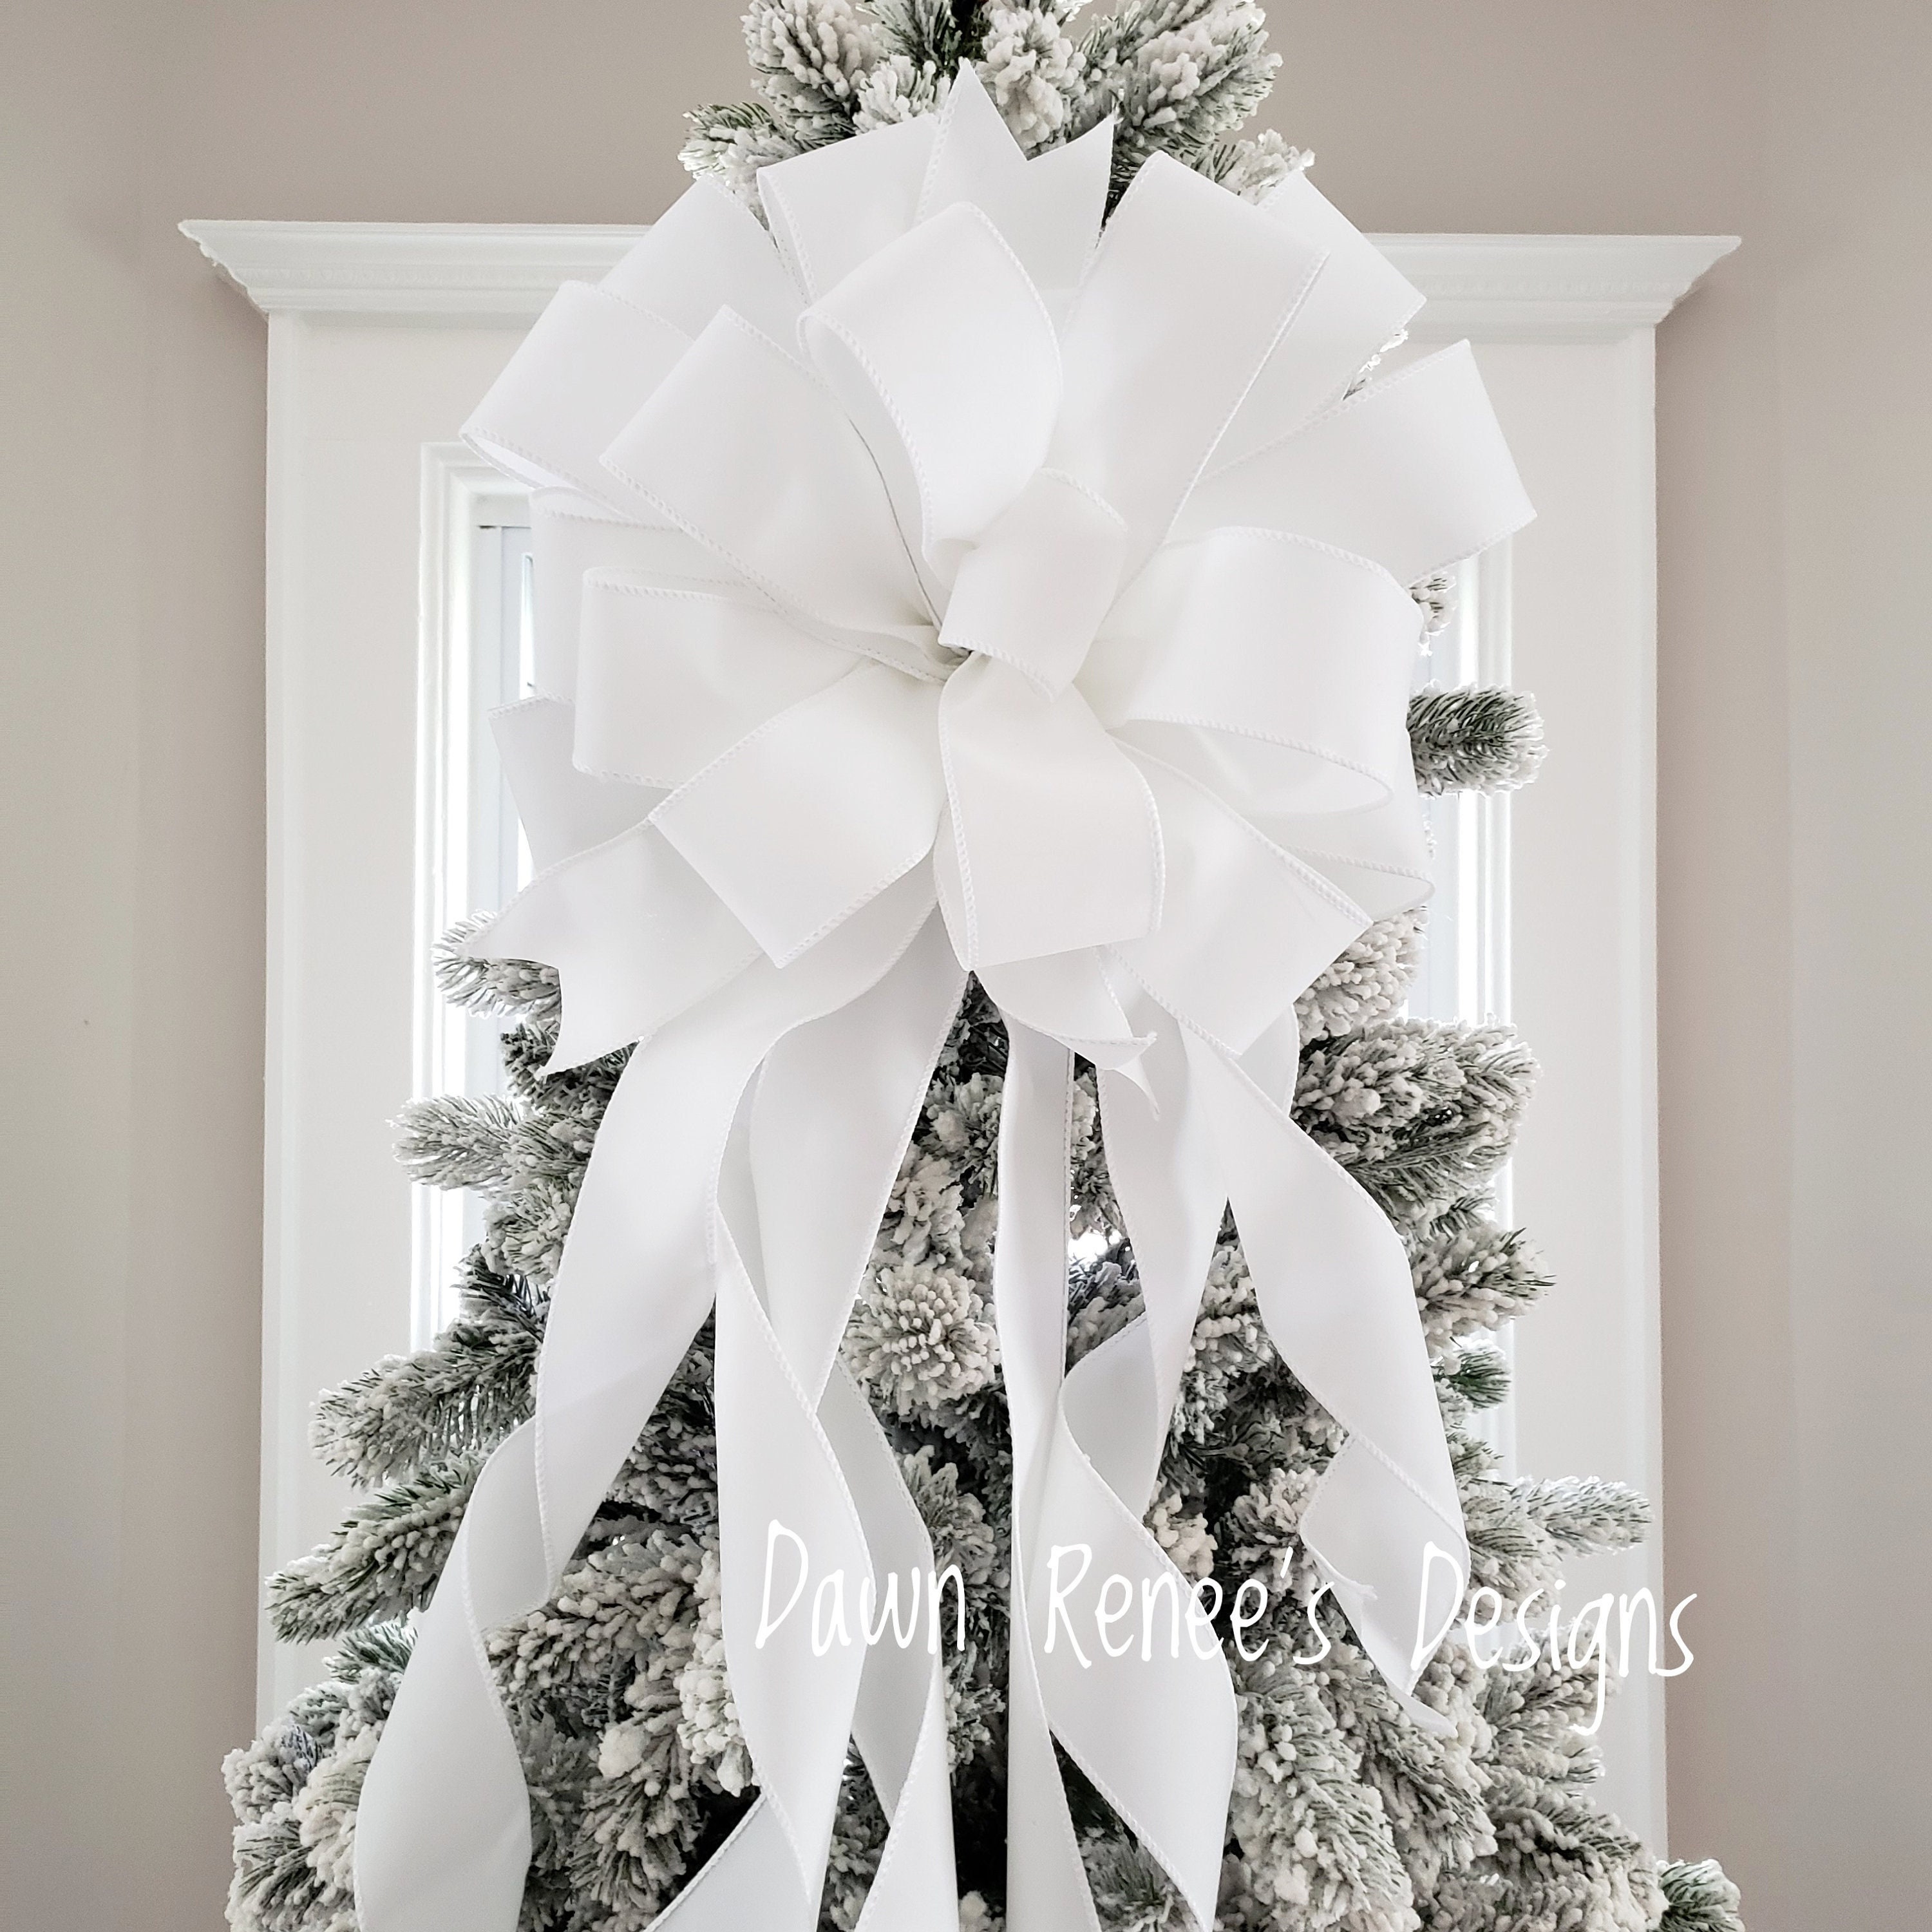 The Mariah red and white Christmas tree topper bow-bow with long